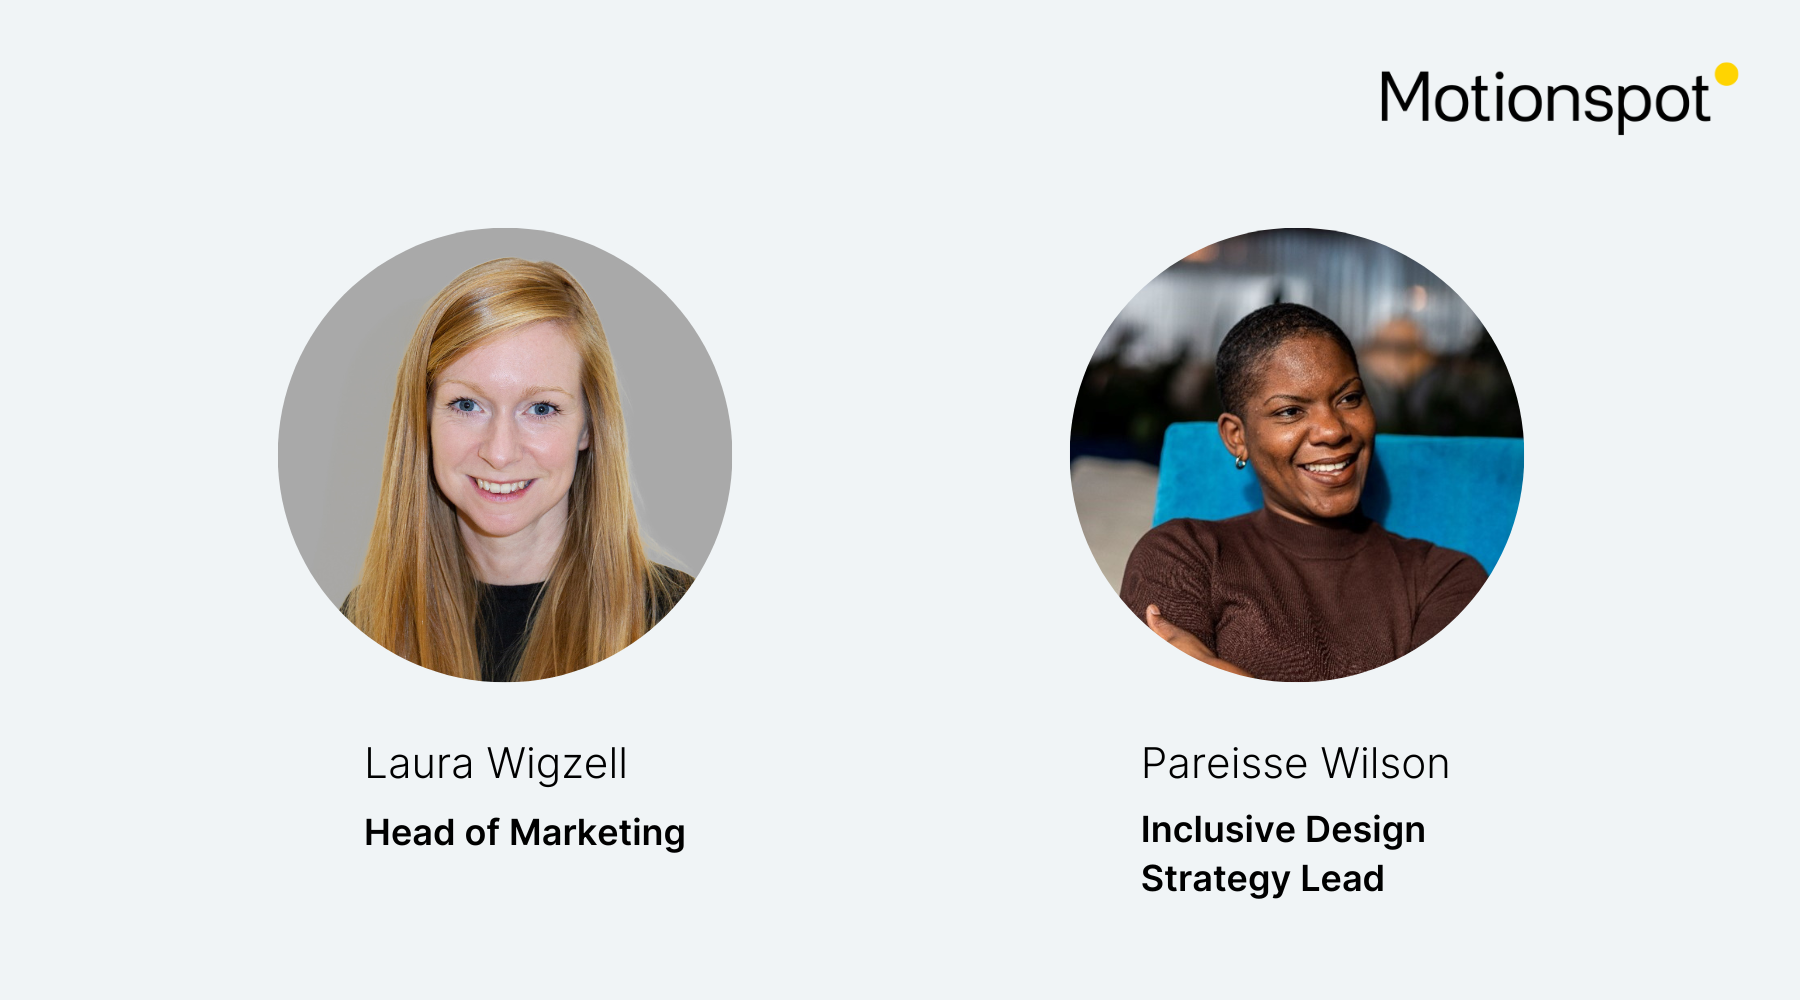 Graphic including Motionspot logo, headshots names and job titles of Laura Wigzell and Pareisse Wilson 